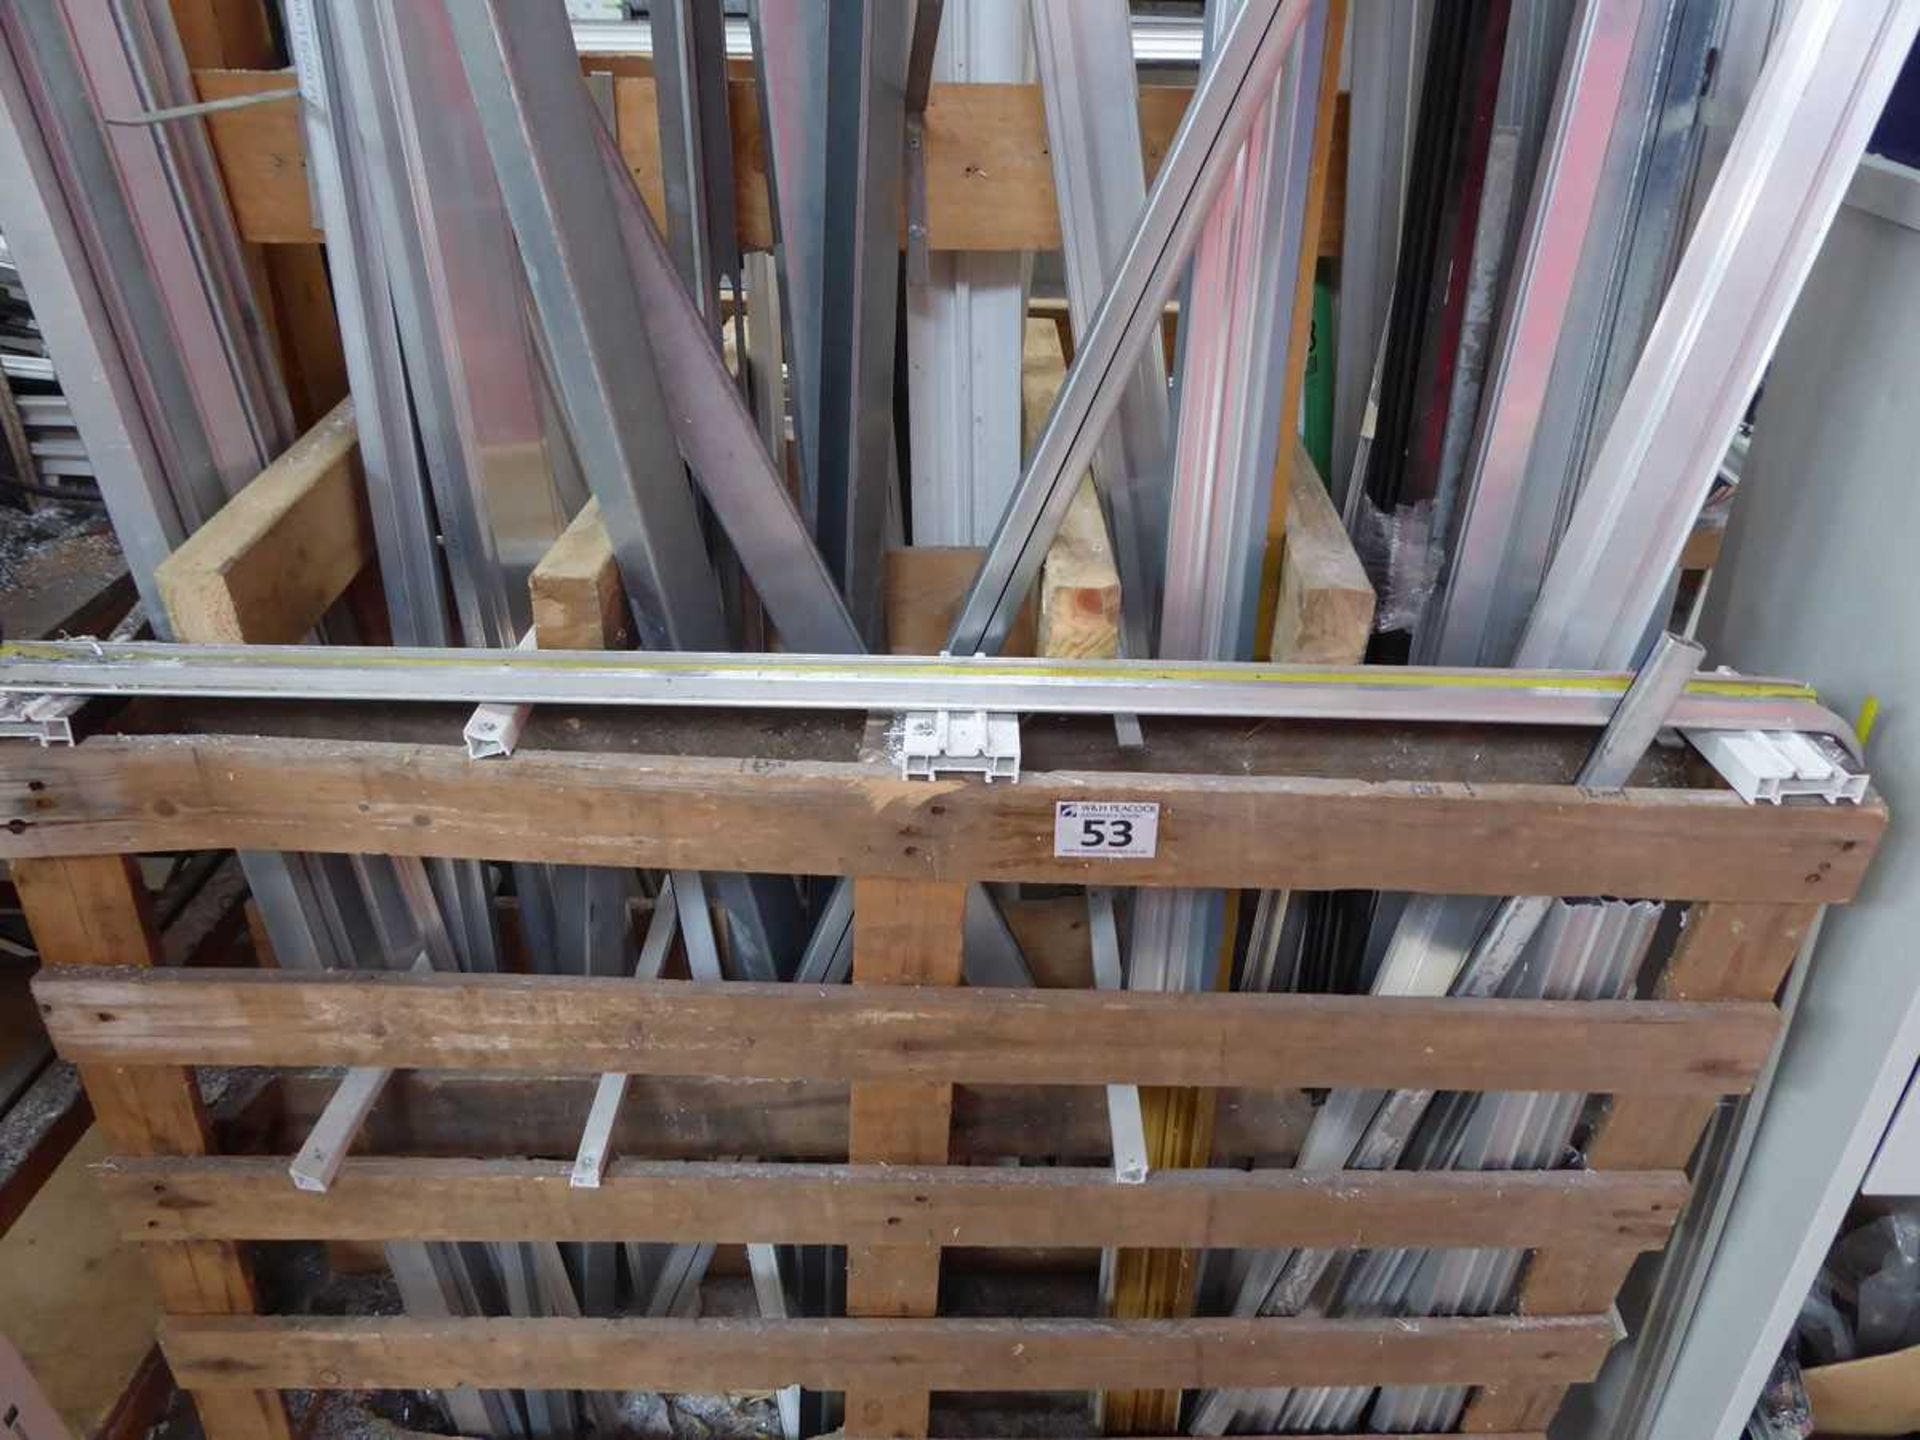 Quantity of mild steel and aluminium extrusion and offcuts